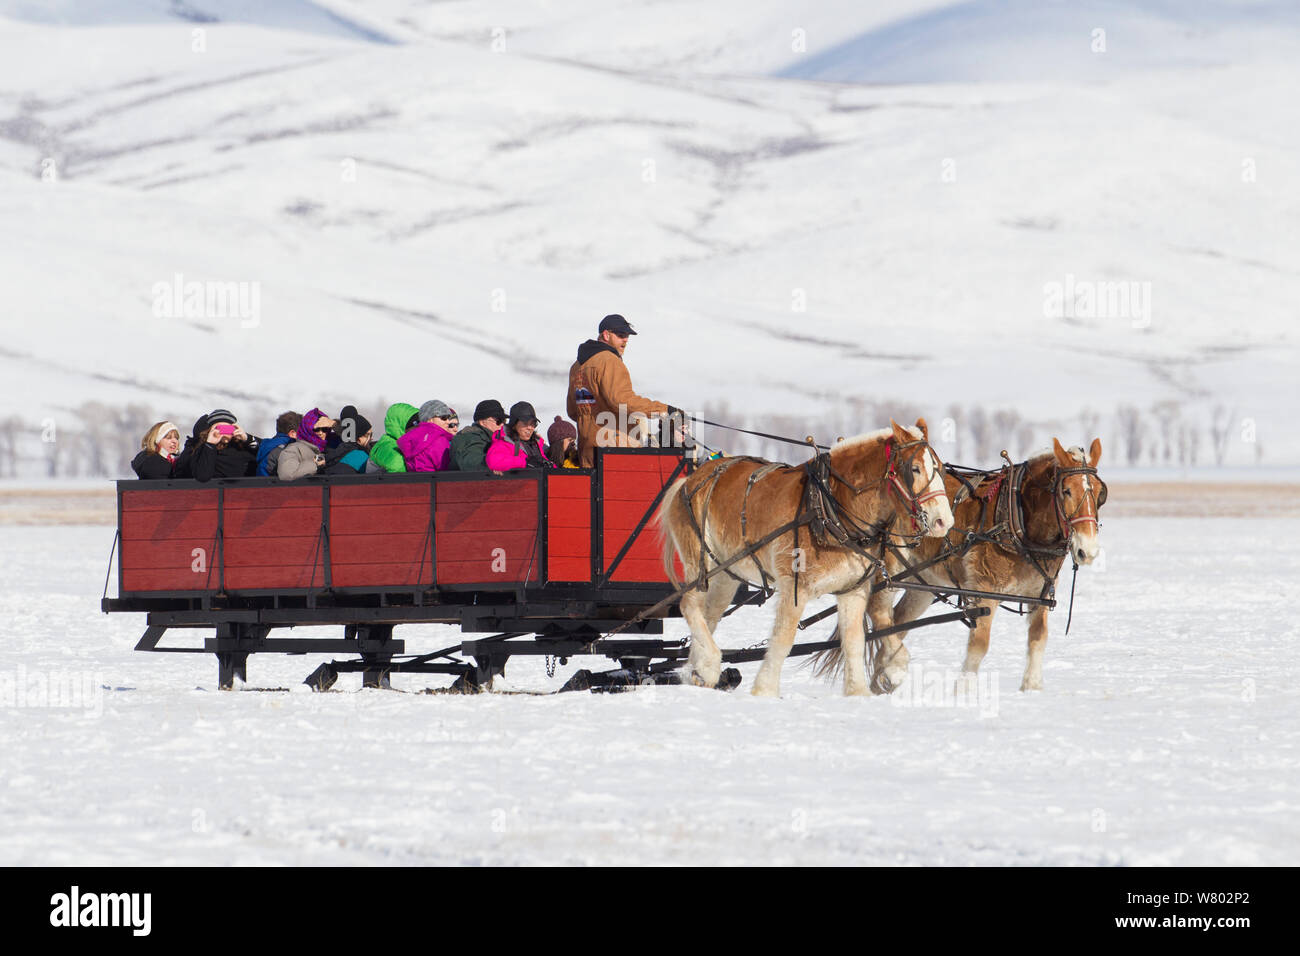 Horse and cart with tourists looking for elk, National Elk Refuge, Wyoming, USA. February 2014. Stock Photo